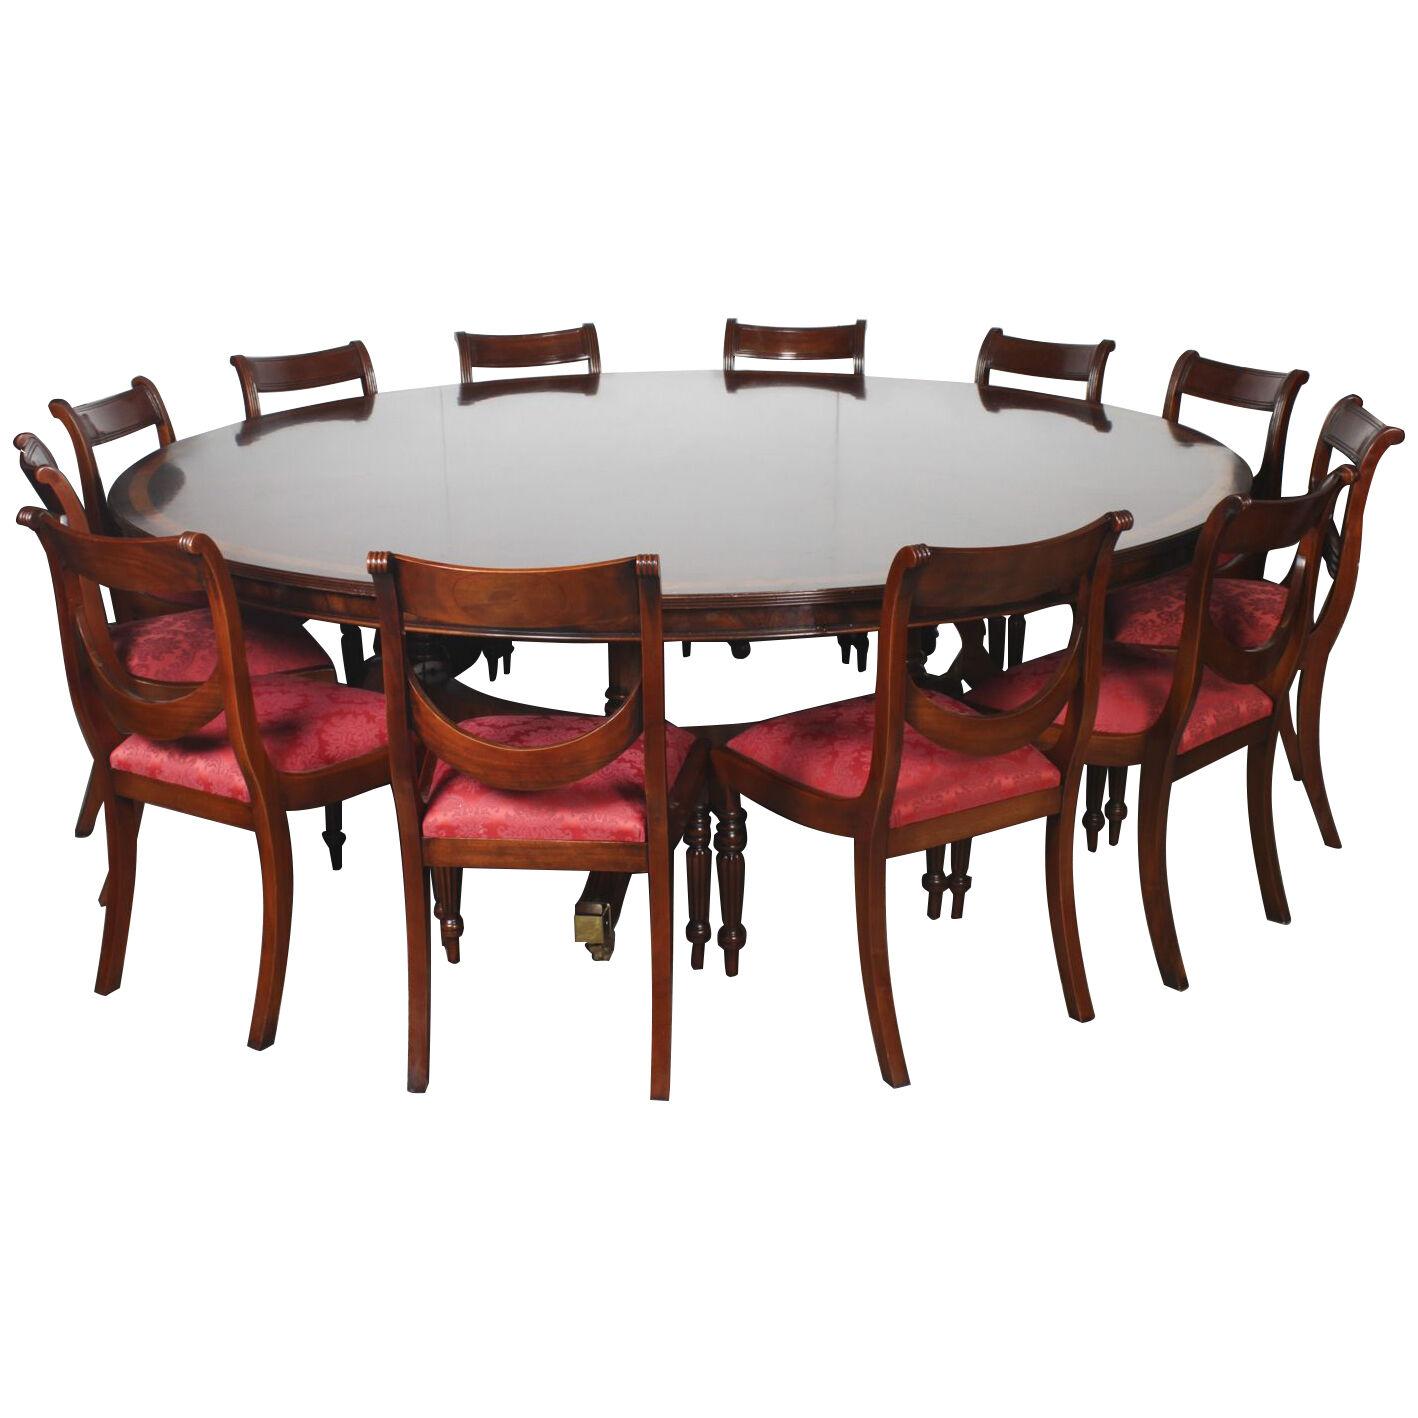 Vintage 8ft Diameter Flame Mahogany Dining Table & 12 Chairs 20th C